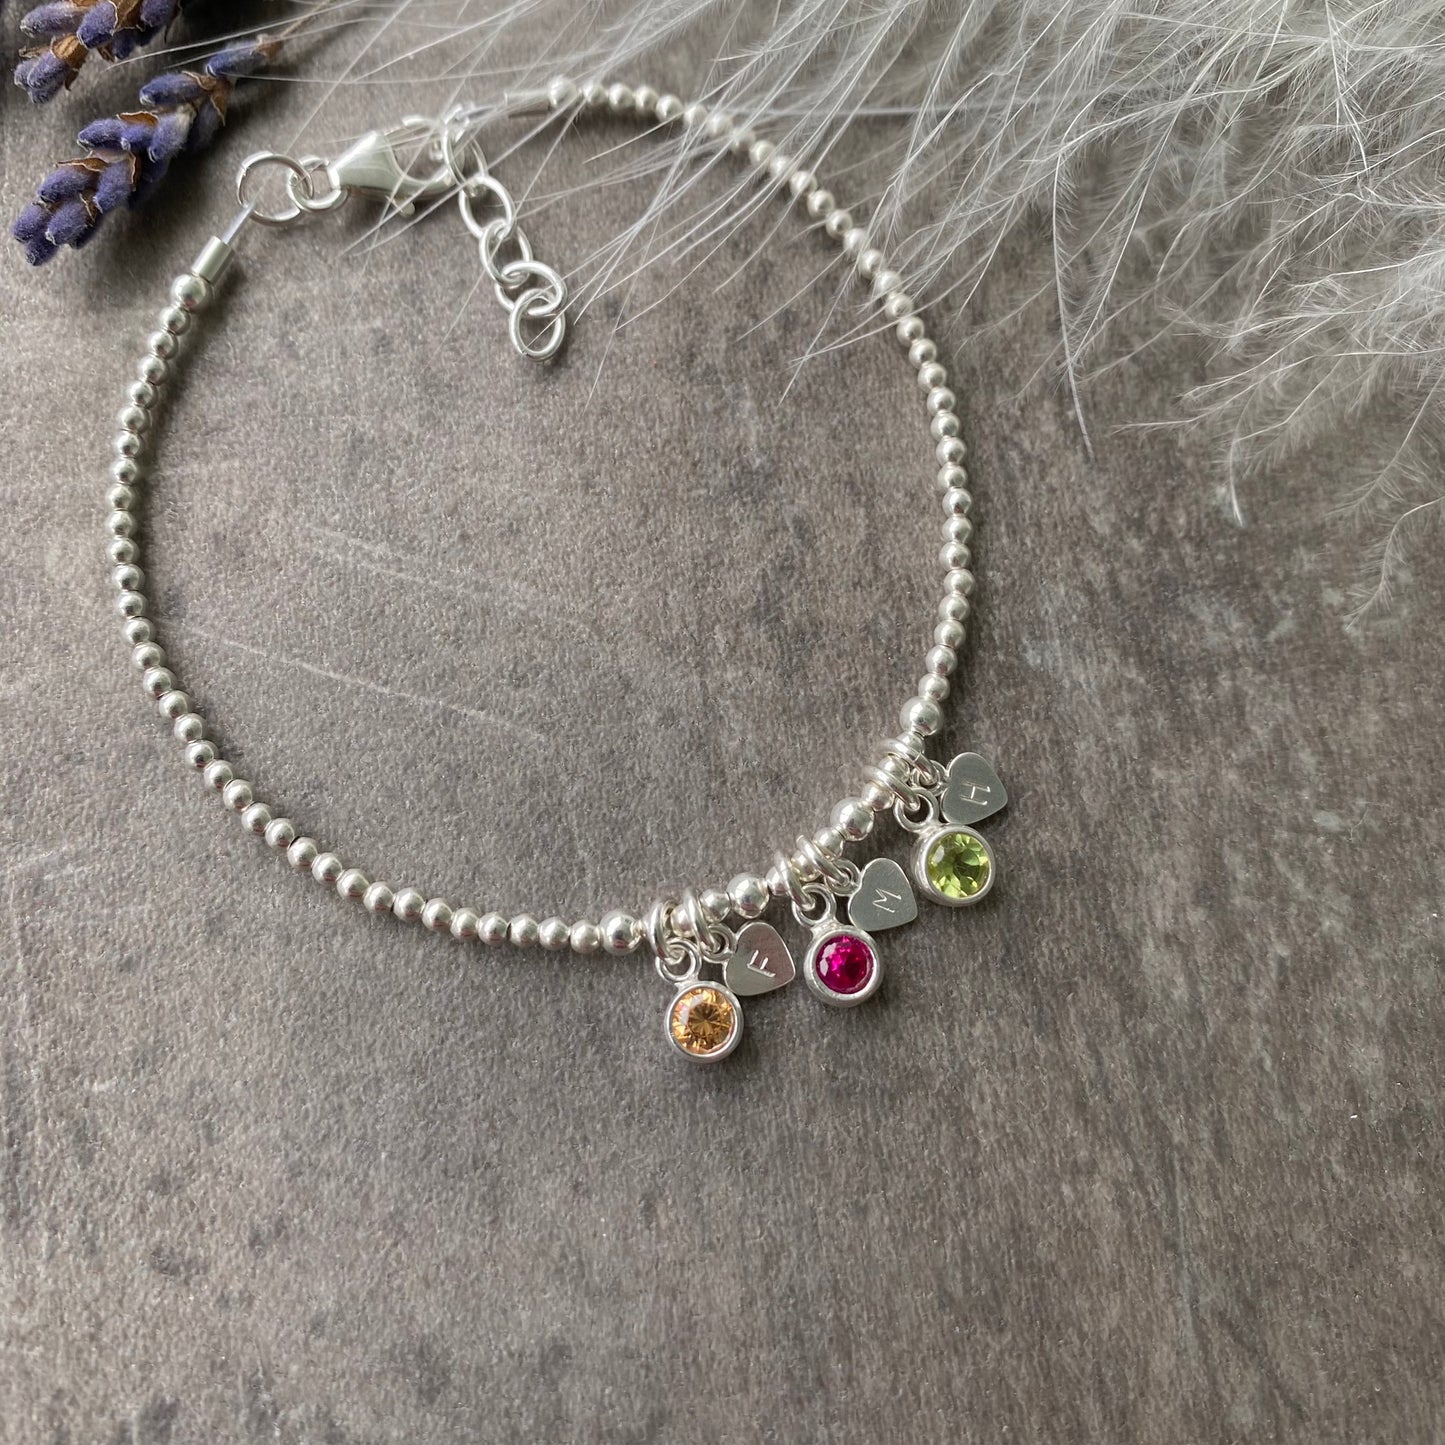 Personalised Cubic Zirconia Birthstone Charm Bracelet with Initials, Mothers Day Gift for Mum, Family Birthstone Jewellery, Mothers Day Gift